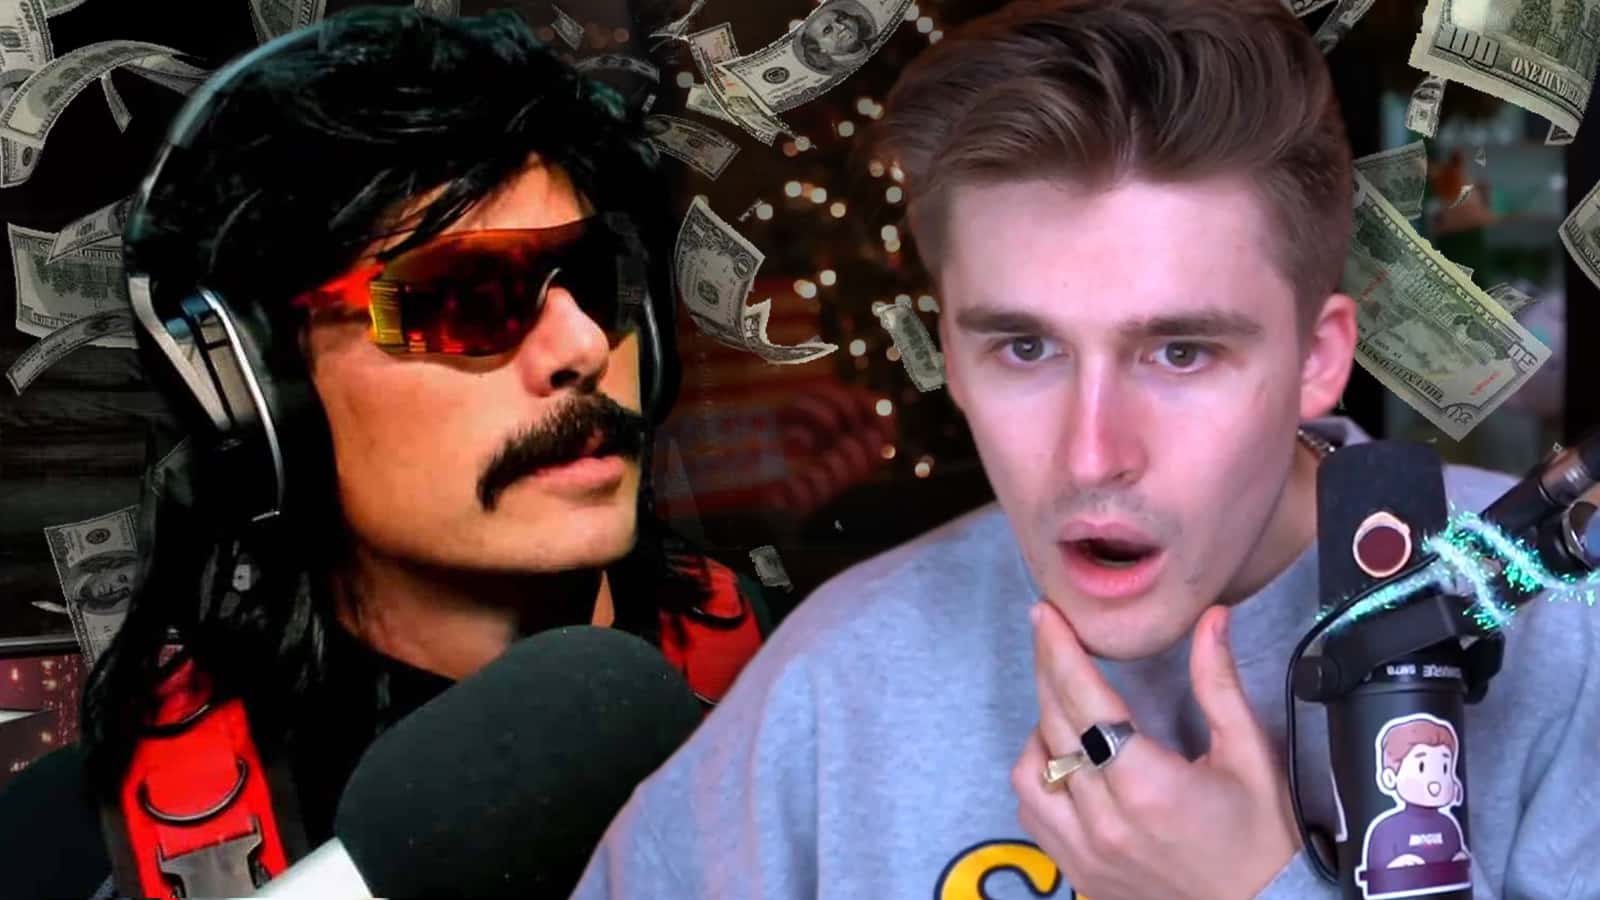 Dr Disrespect next to Ludwig on YouTube with money behind them.